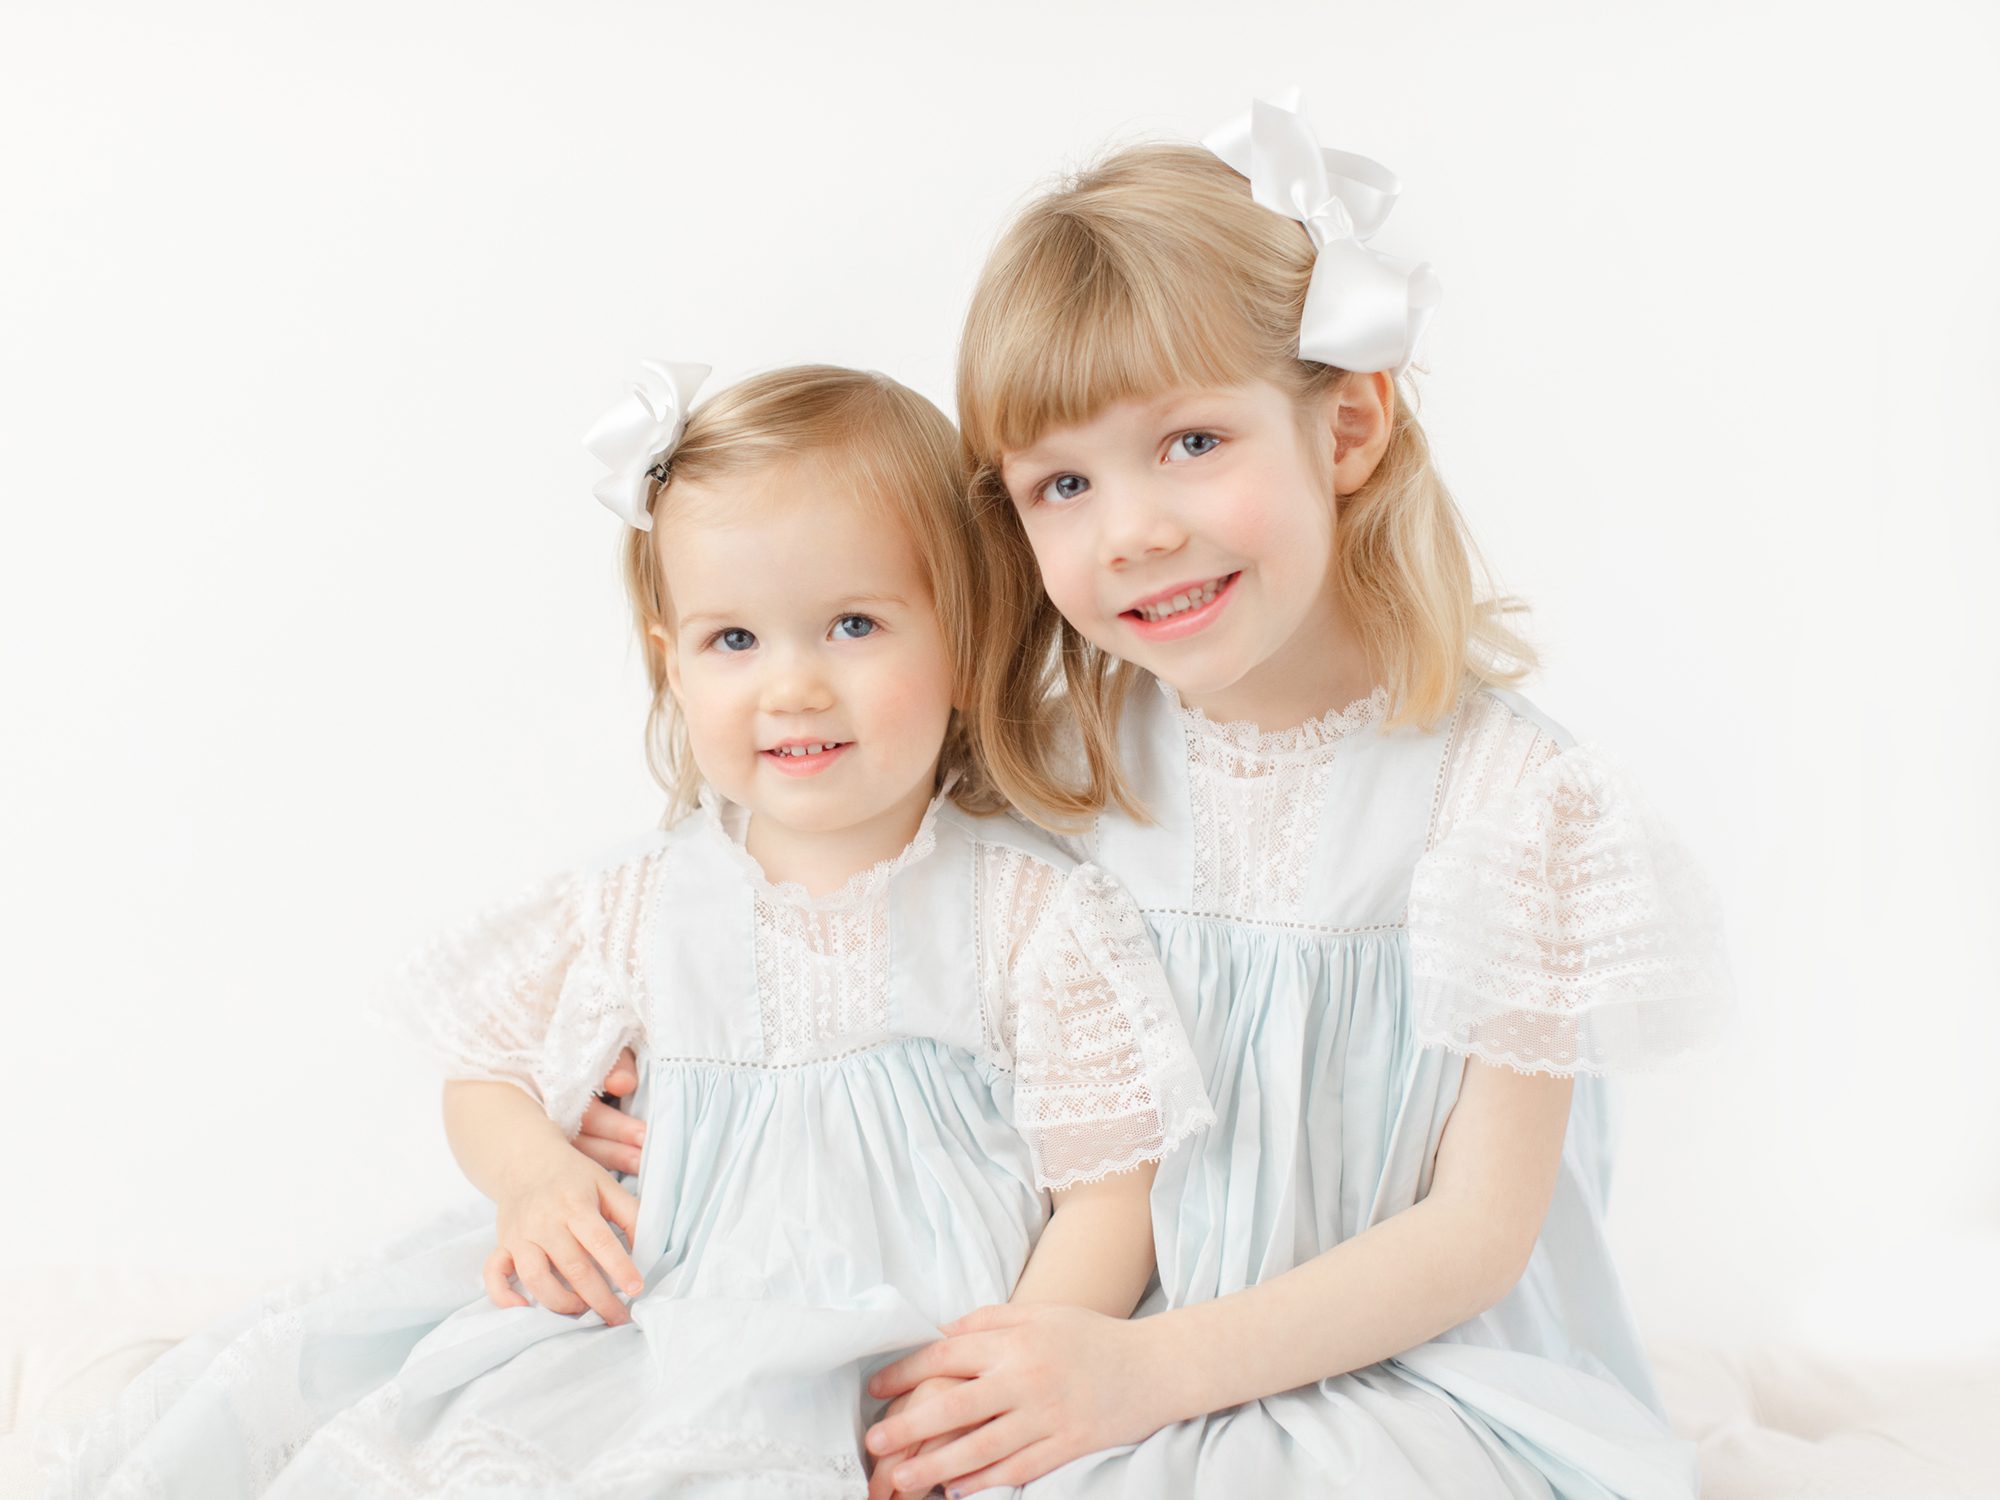 Heirloom Portrait Photography of sisters in Athens GA.